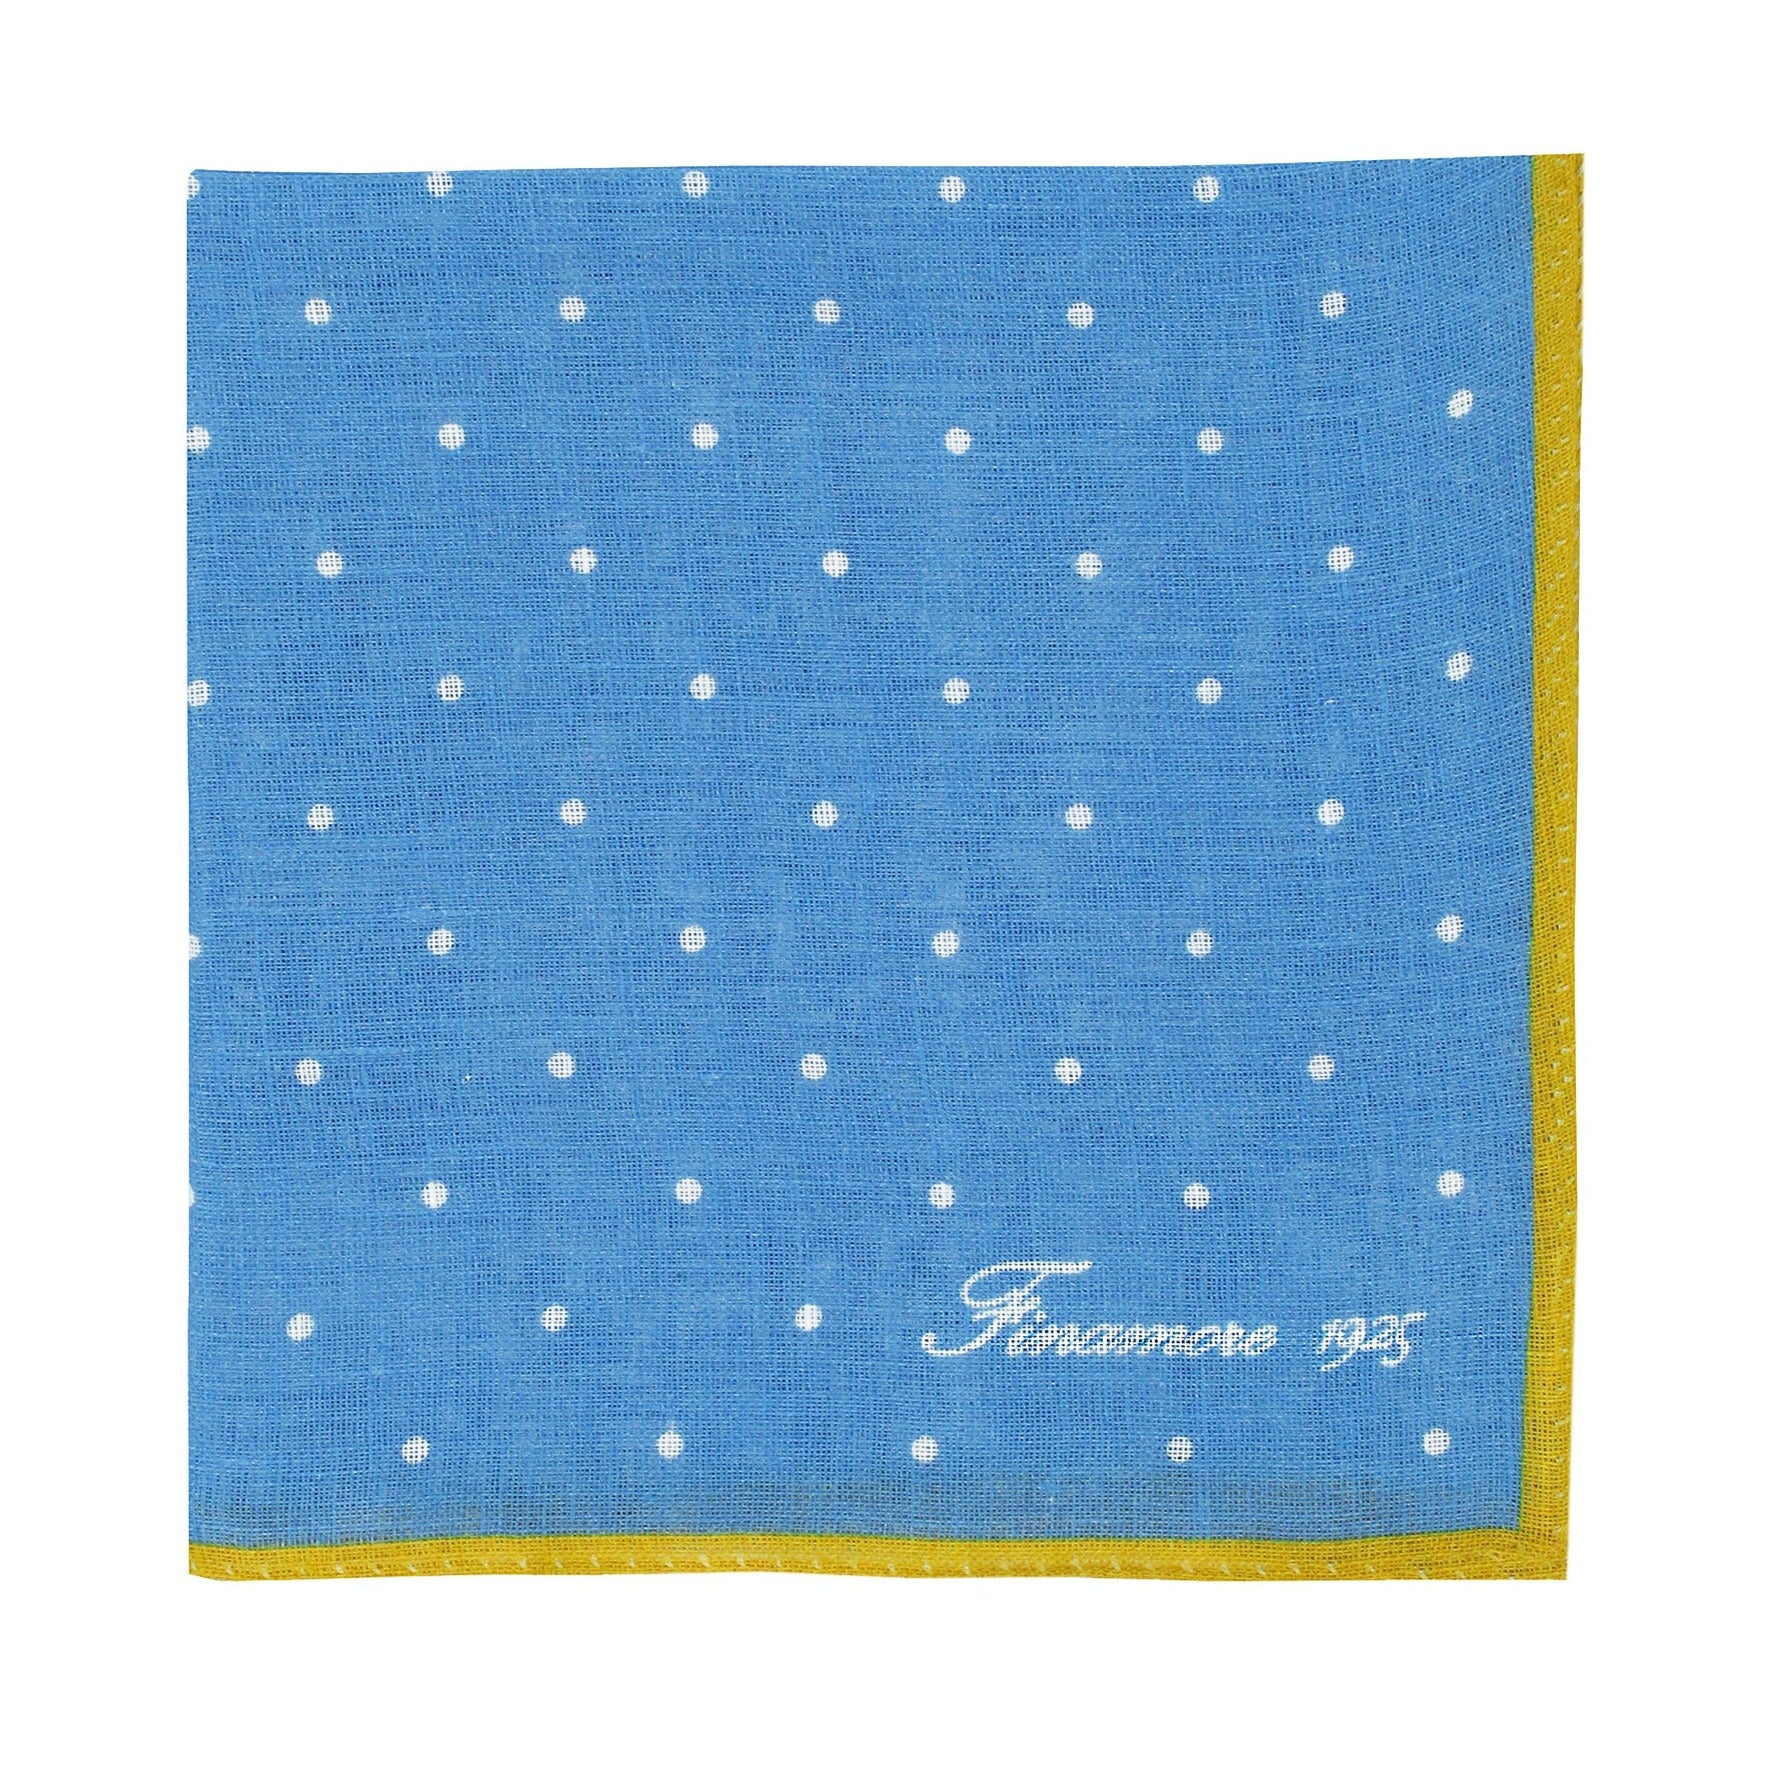 Linen pocket square with light blue background and ochre border